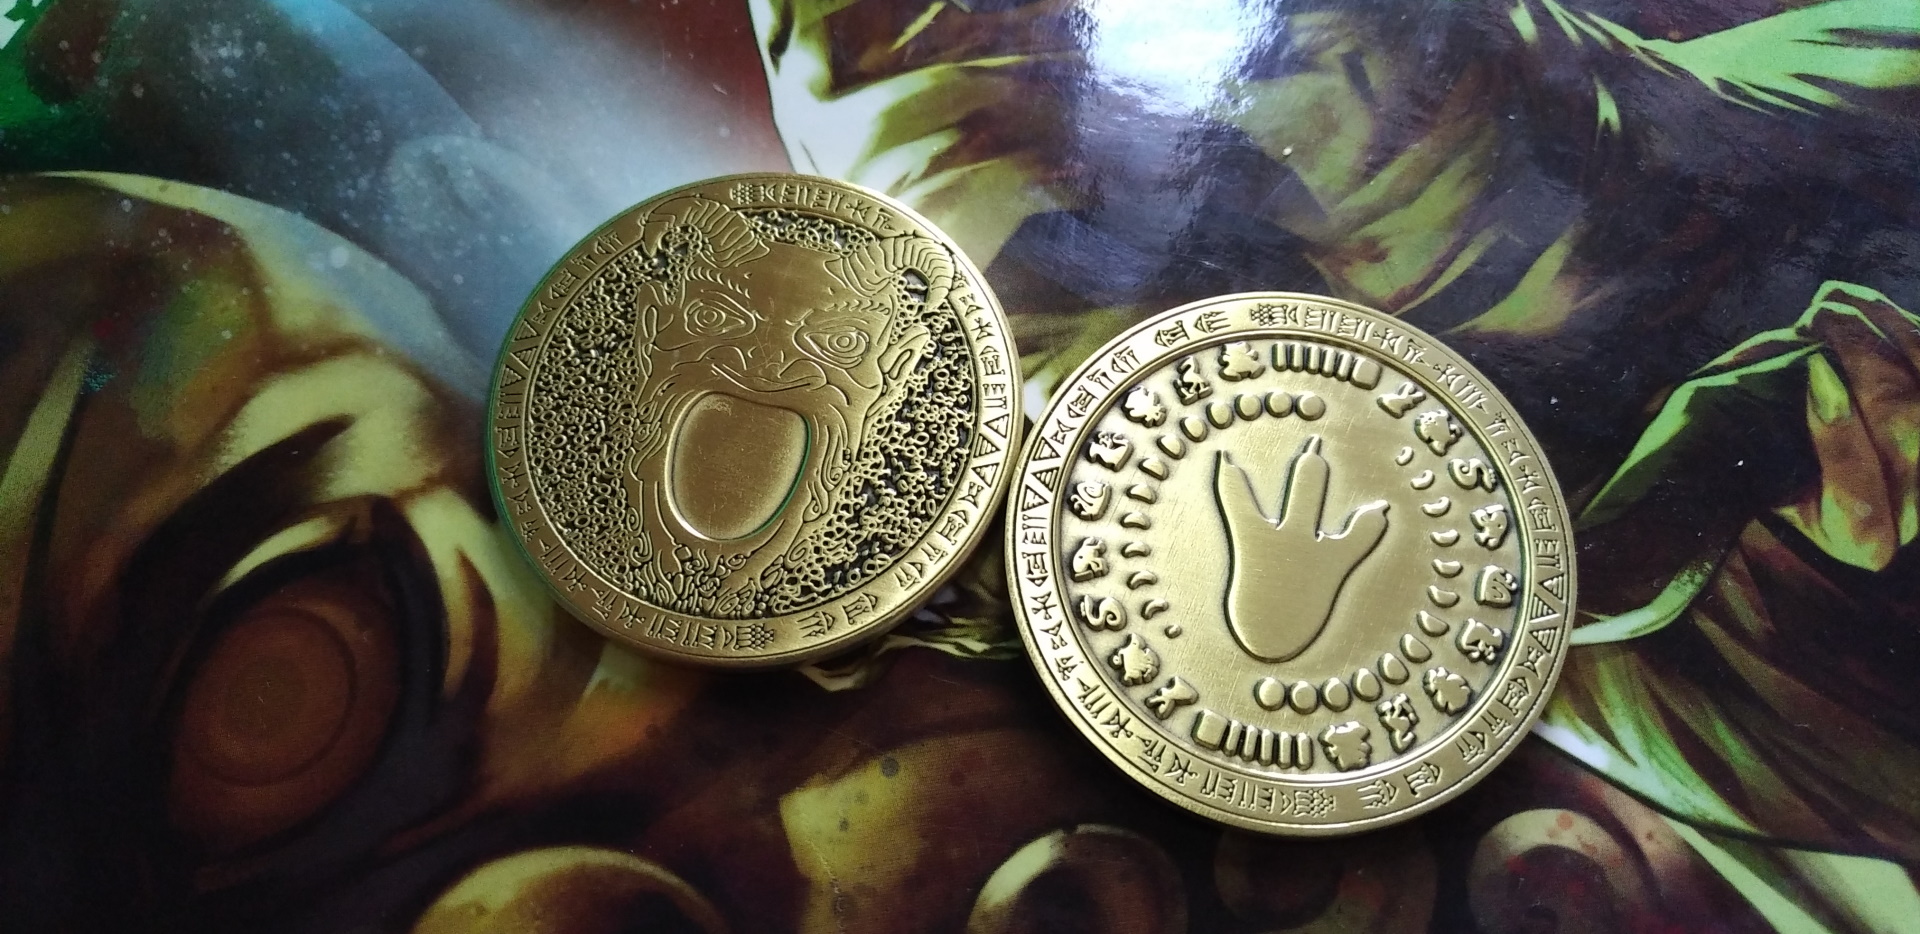 Tomb of Annihilation coin